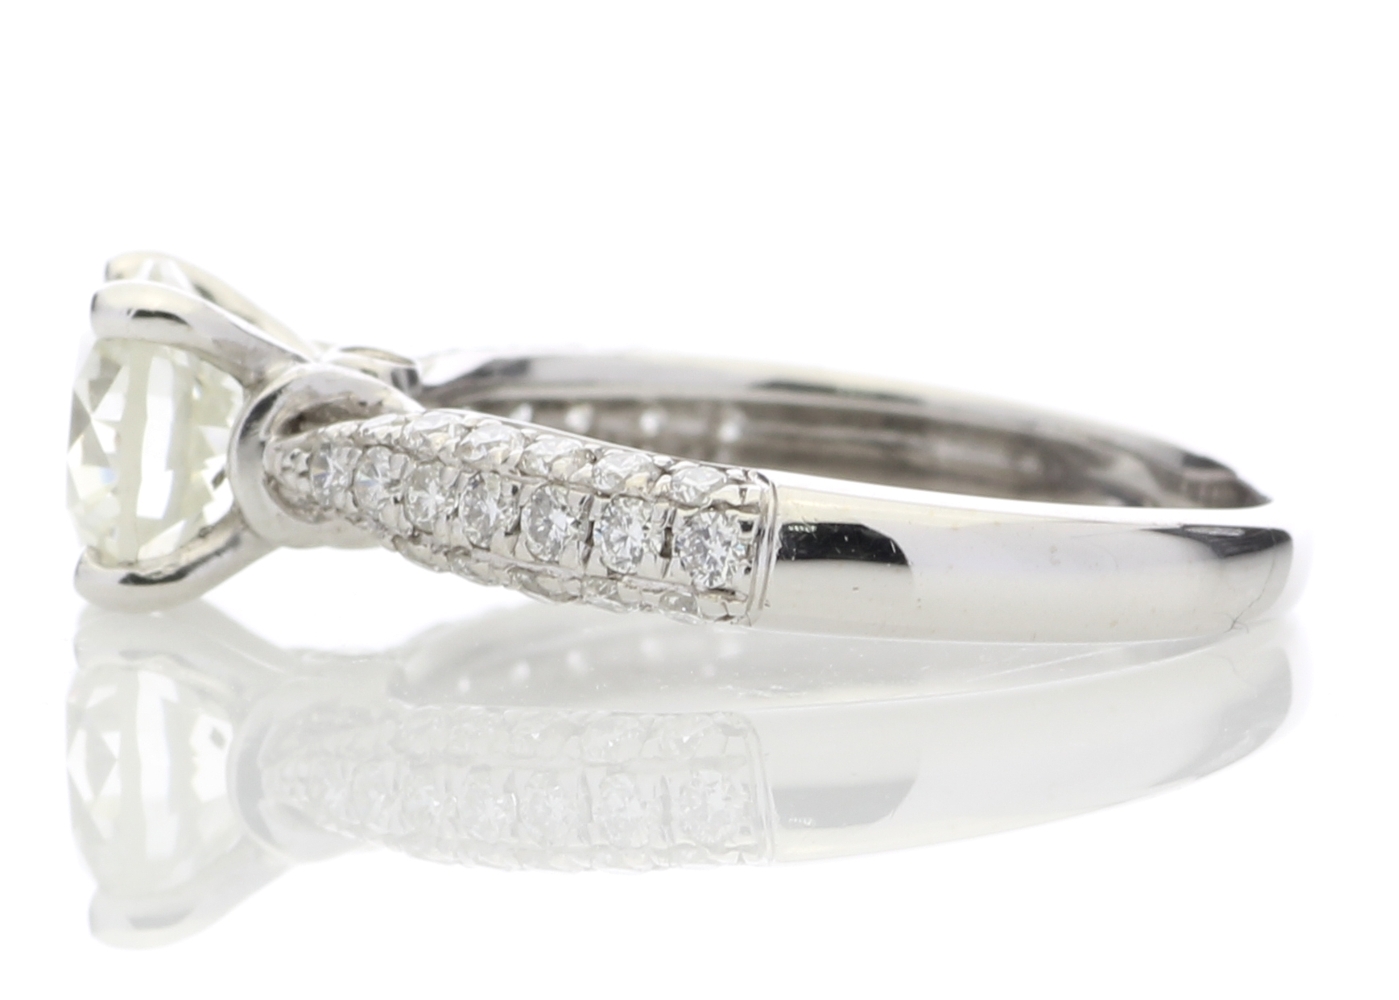 18ct White Gold Diamond Ring With Stone Set Shoulders 1.38 Carats - Valued By IDI £23,780.00 - A - Image 5 of 10